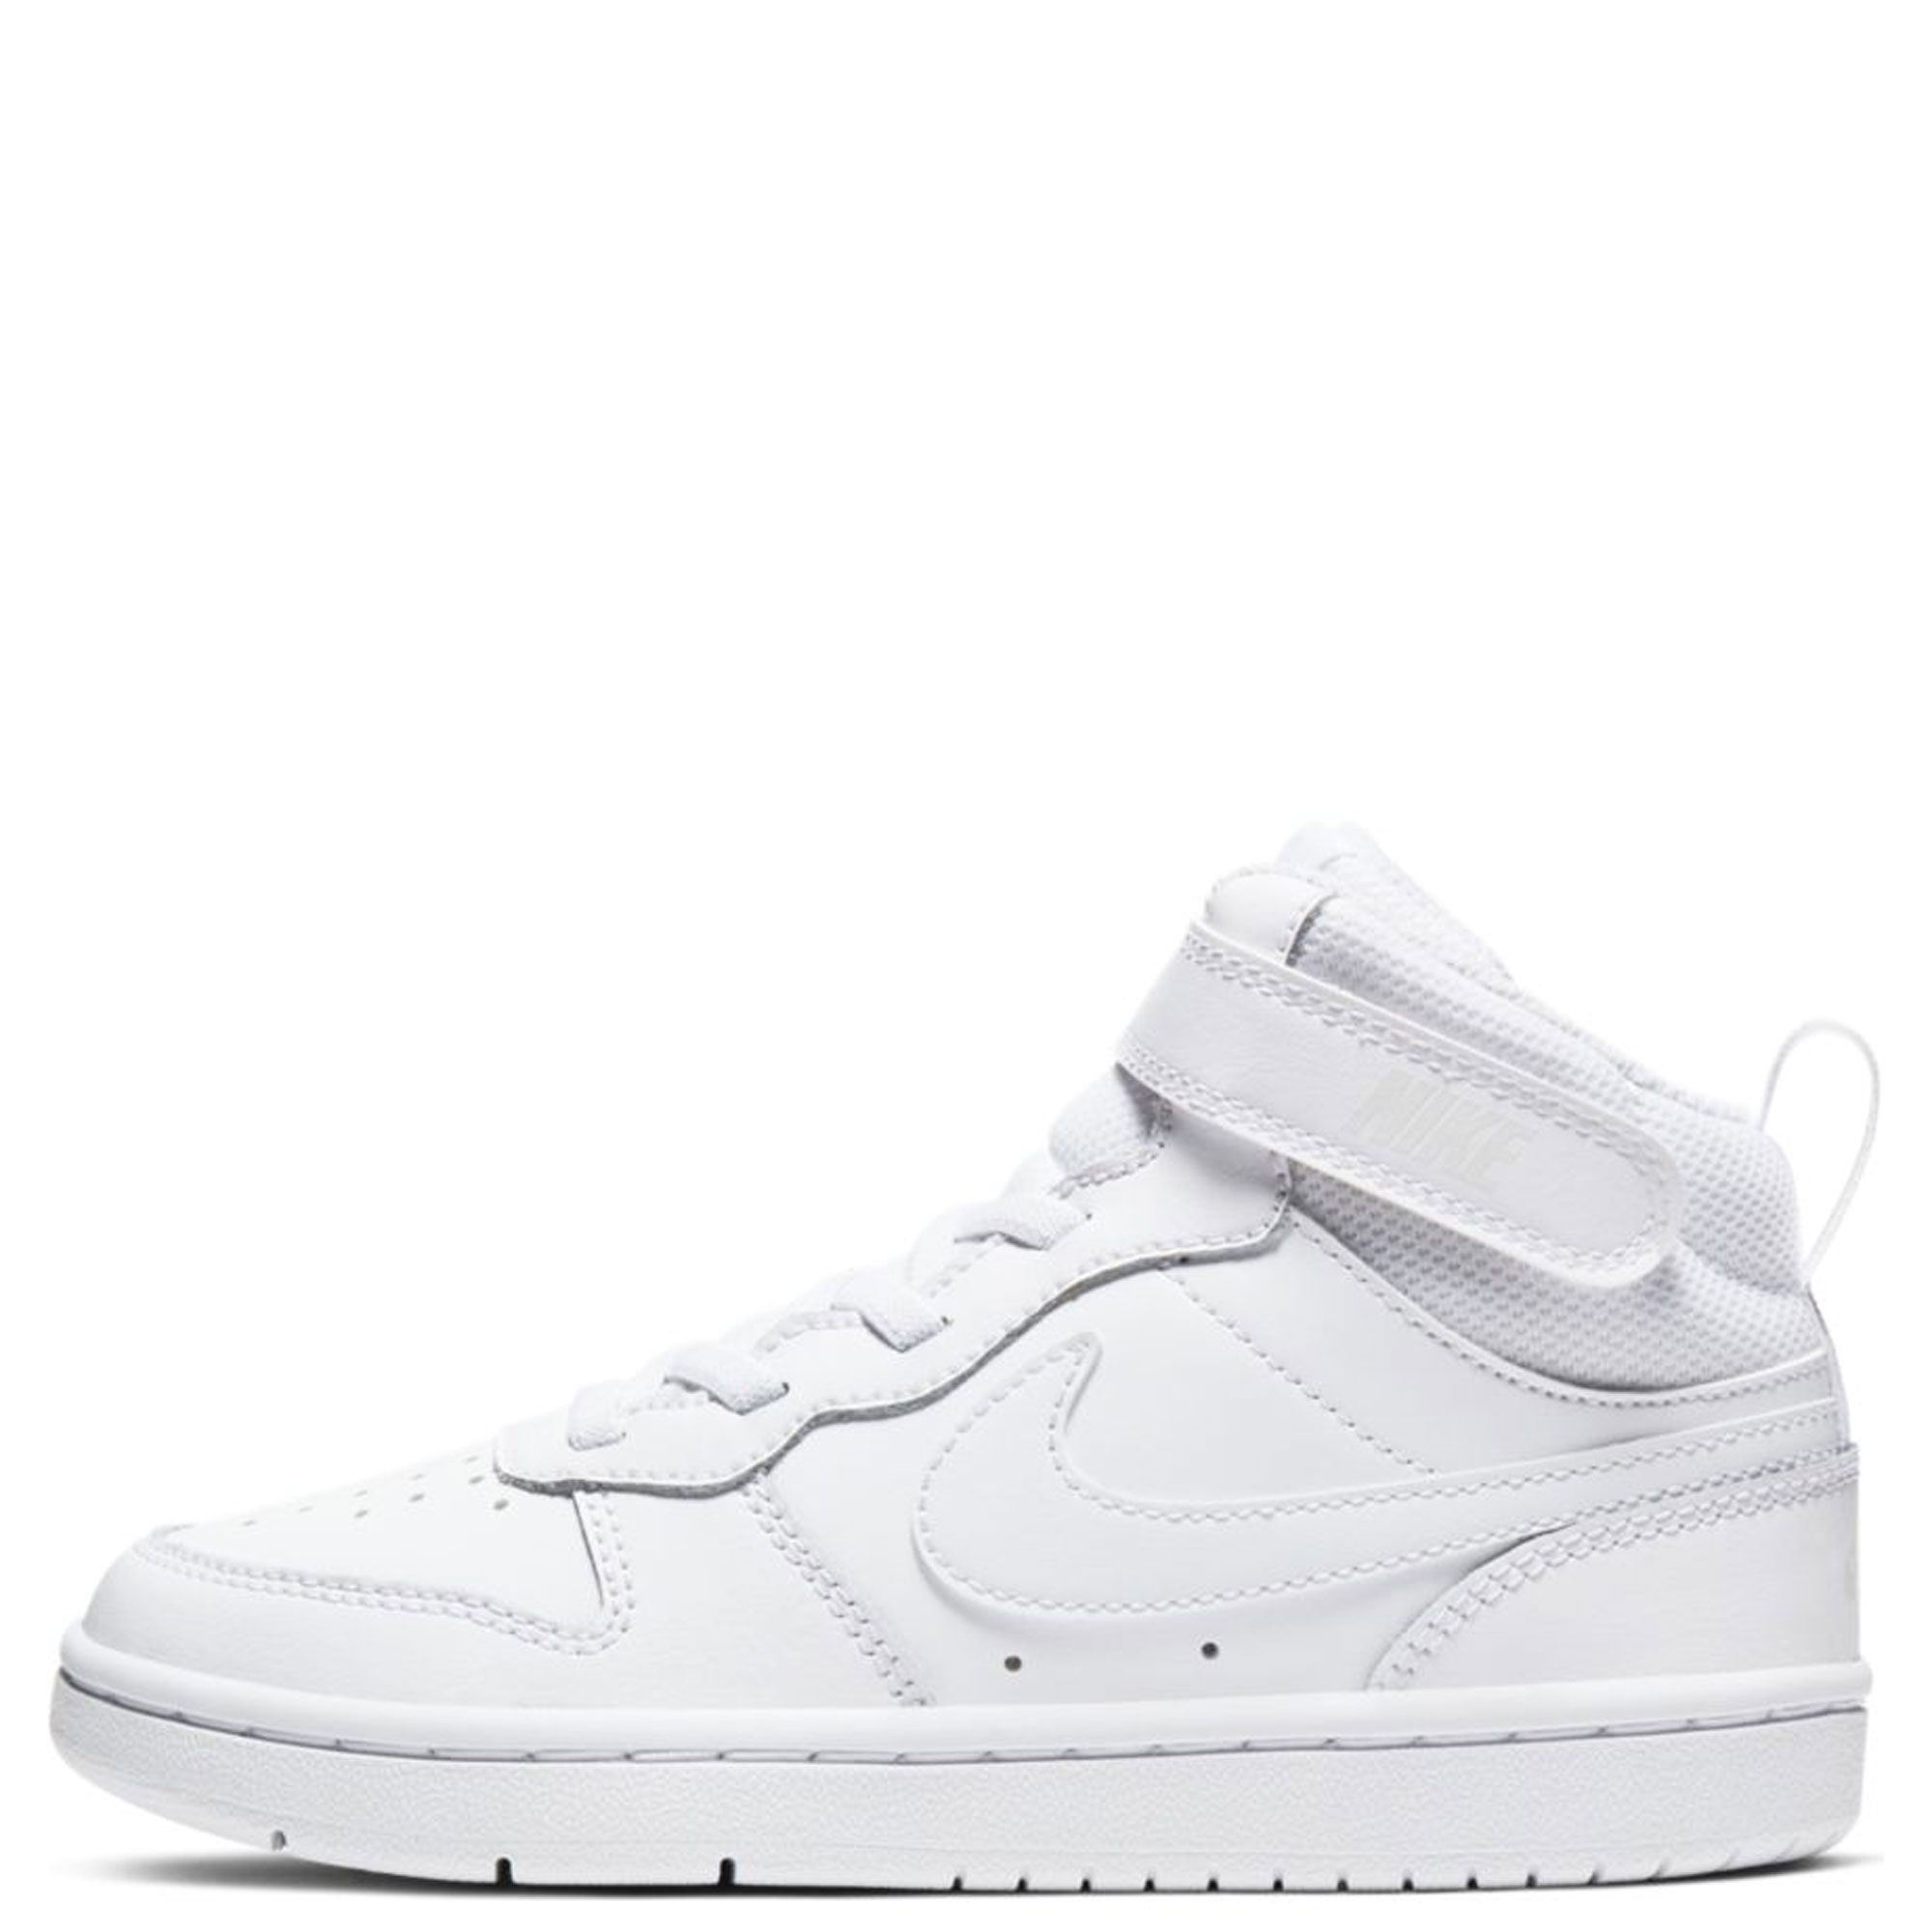 Nike Little Kid's Court Borough Mid 2 Sneakers